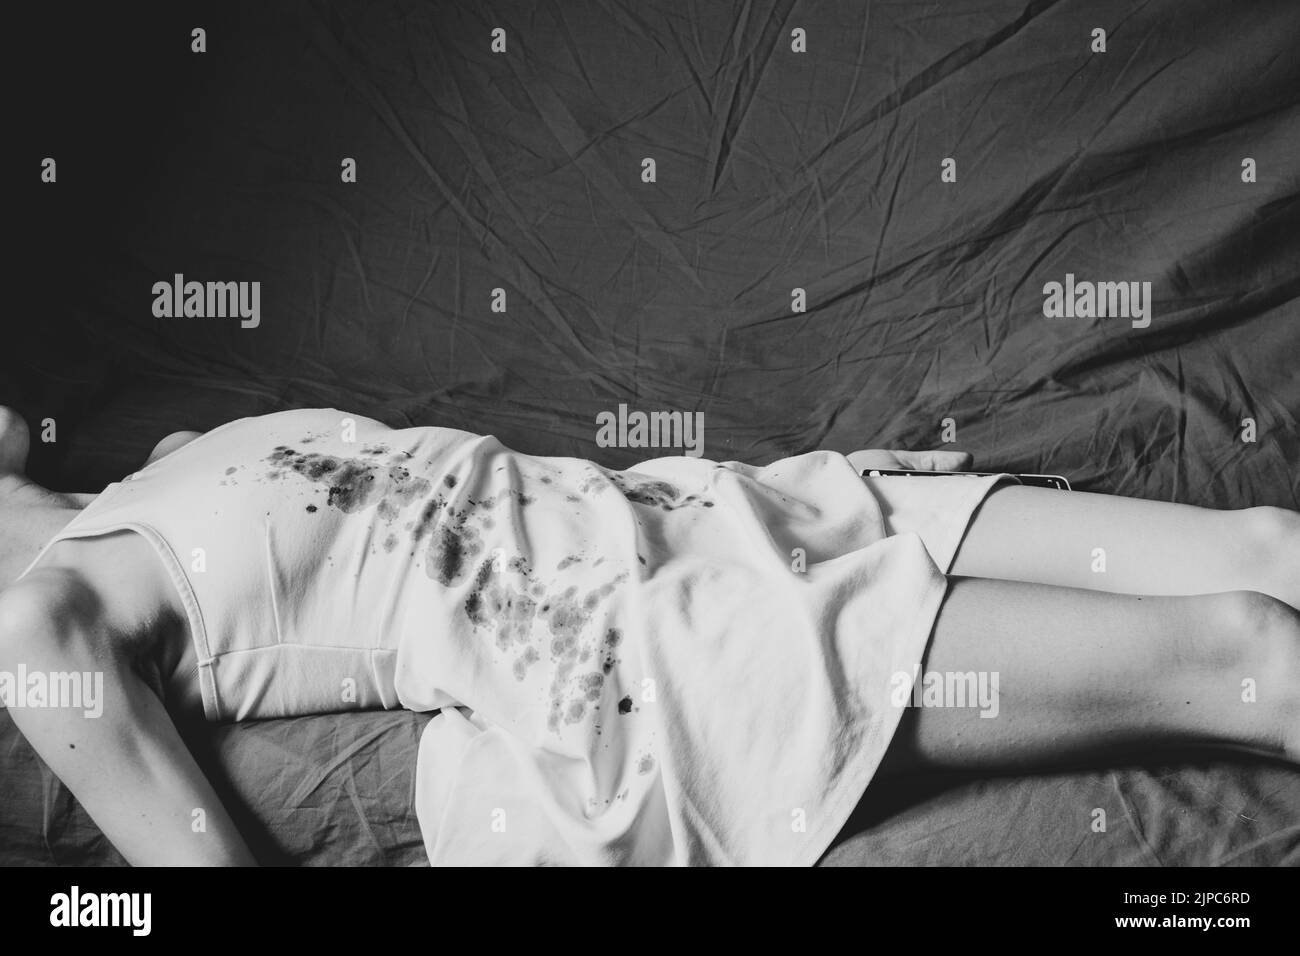 A murdered and tortured Ukrainian woman in a white dress and bloodstains lies on a bed at home, a protest action of Ukrainian women protecting women Stock Photo